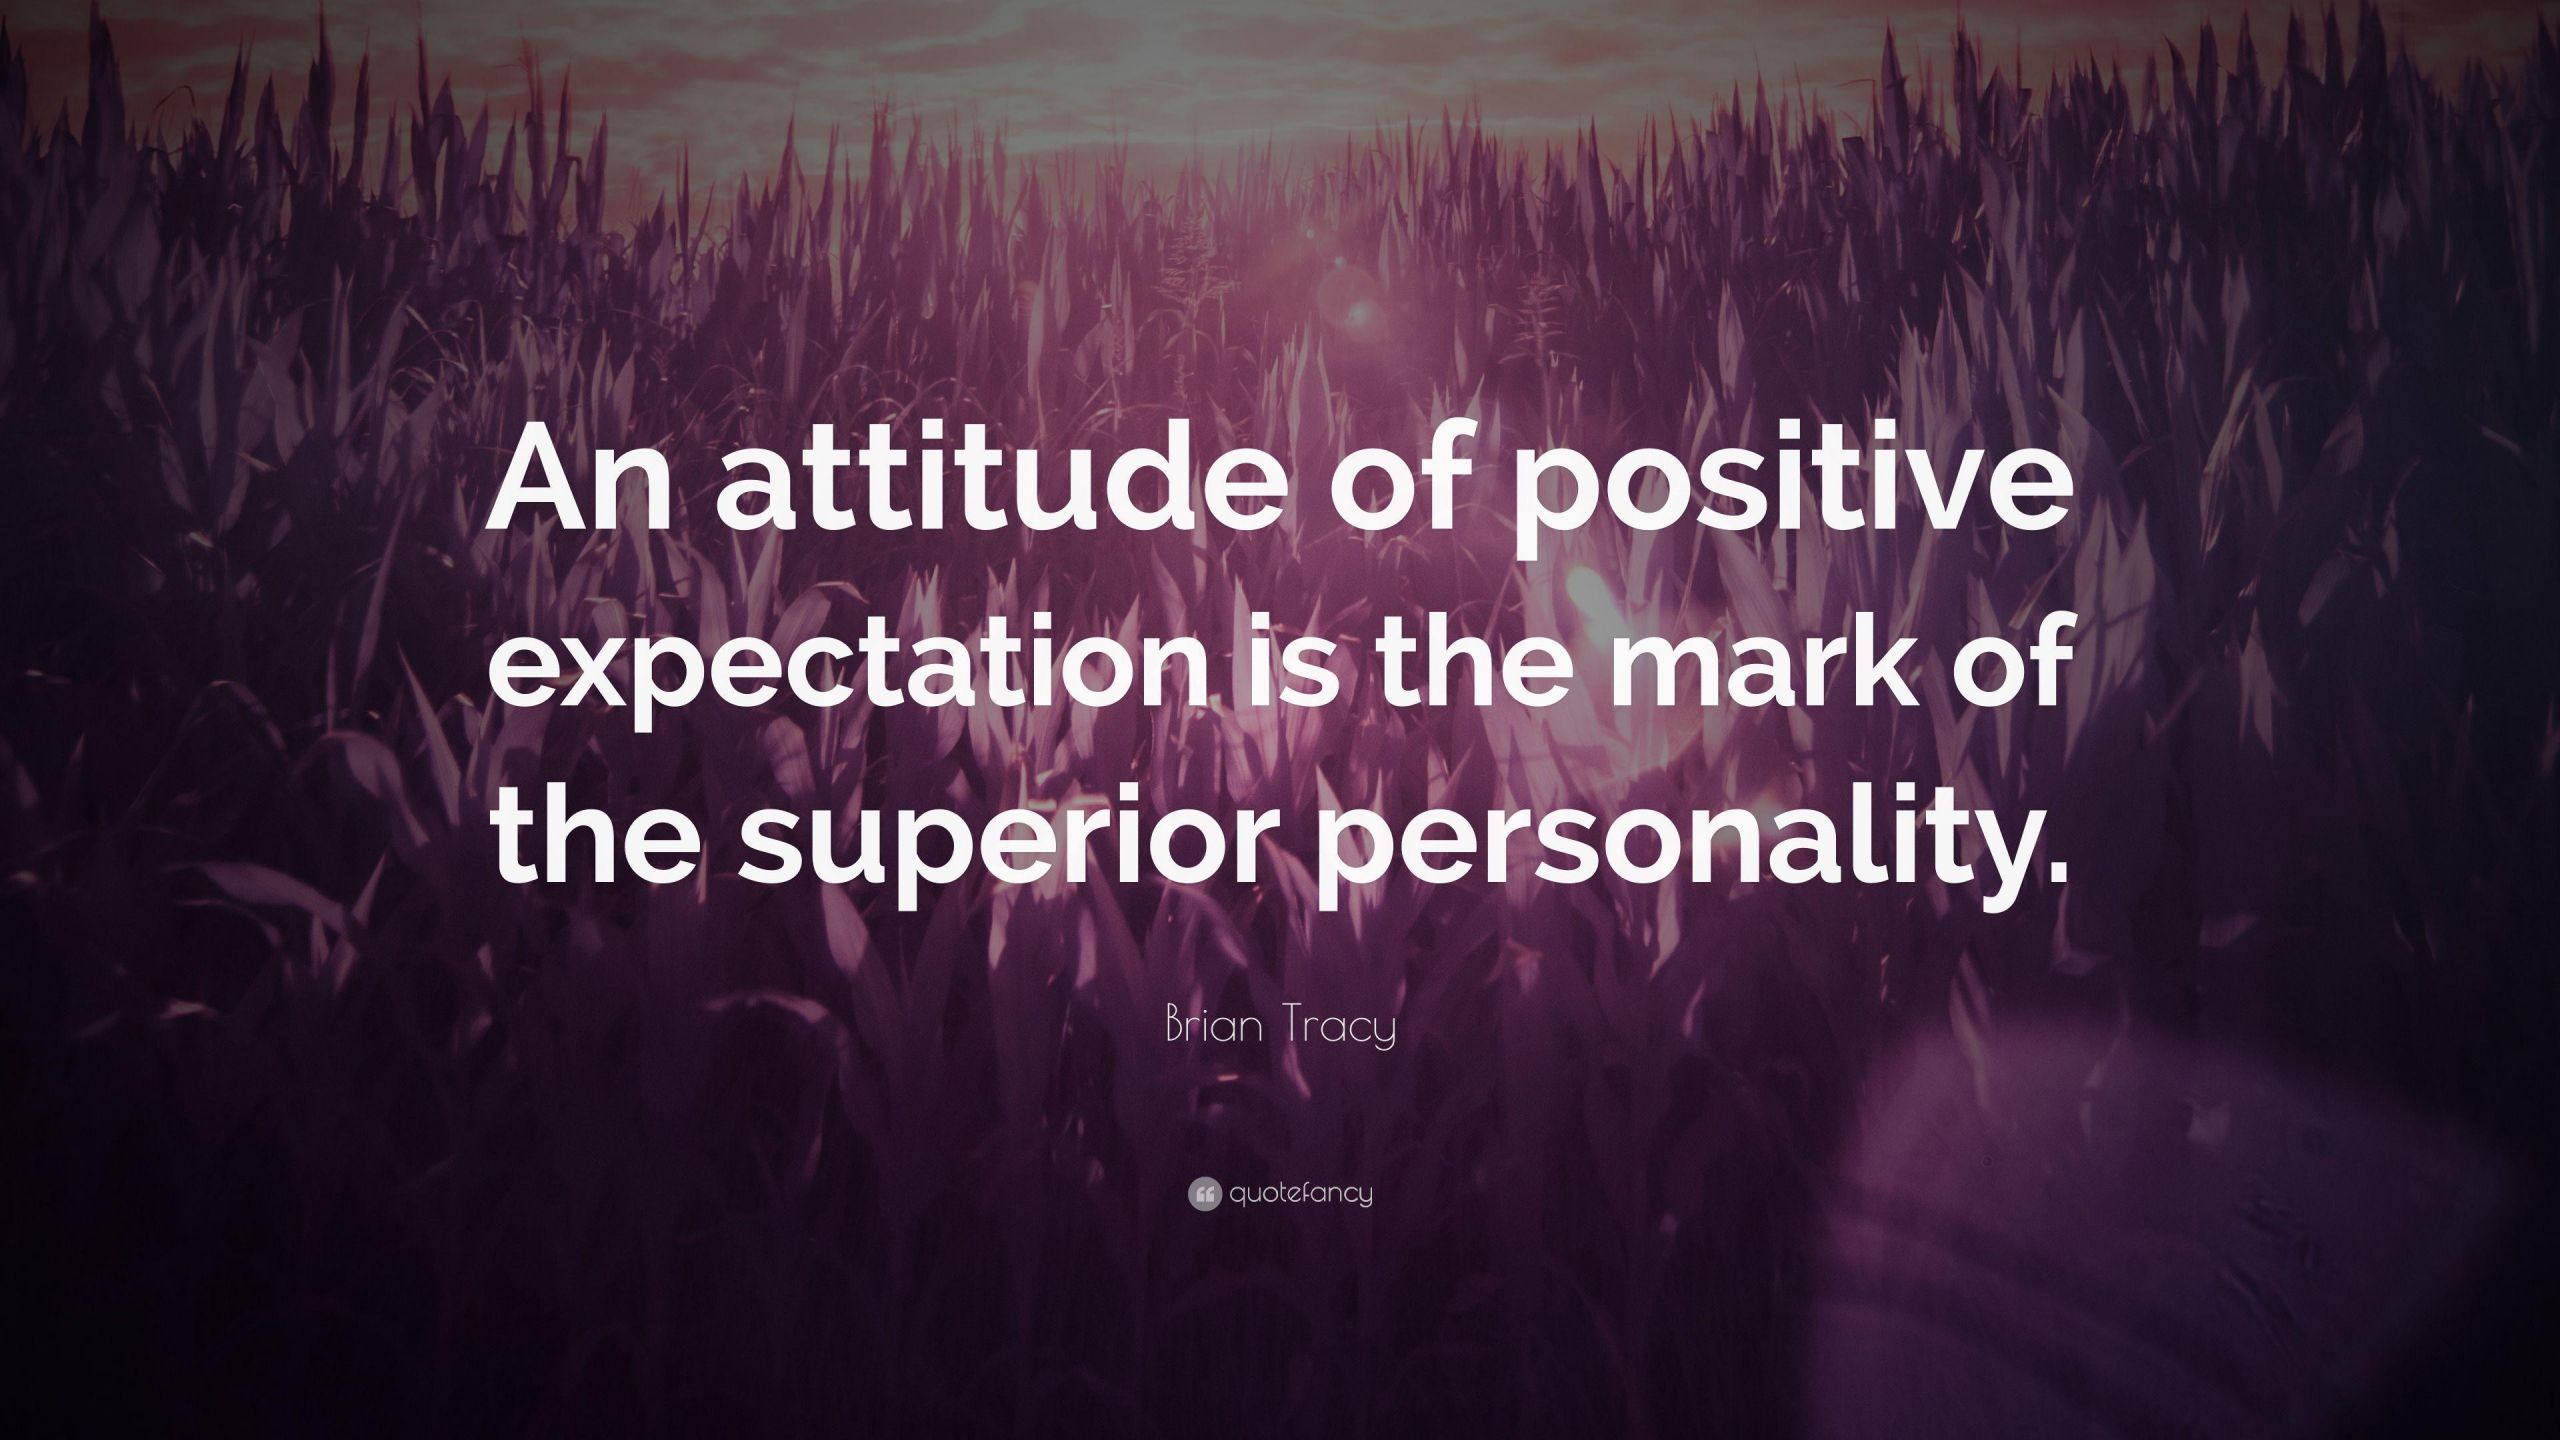 Quotes About Positive Attitude
 Attitude Quotes Wallpapers Wallpaper Cave